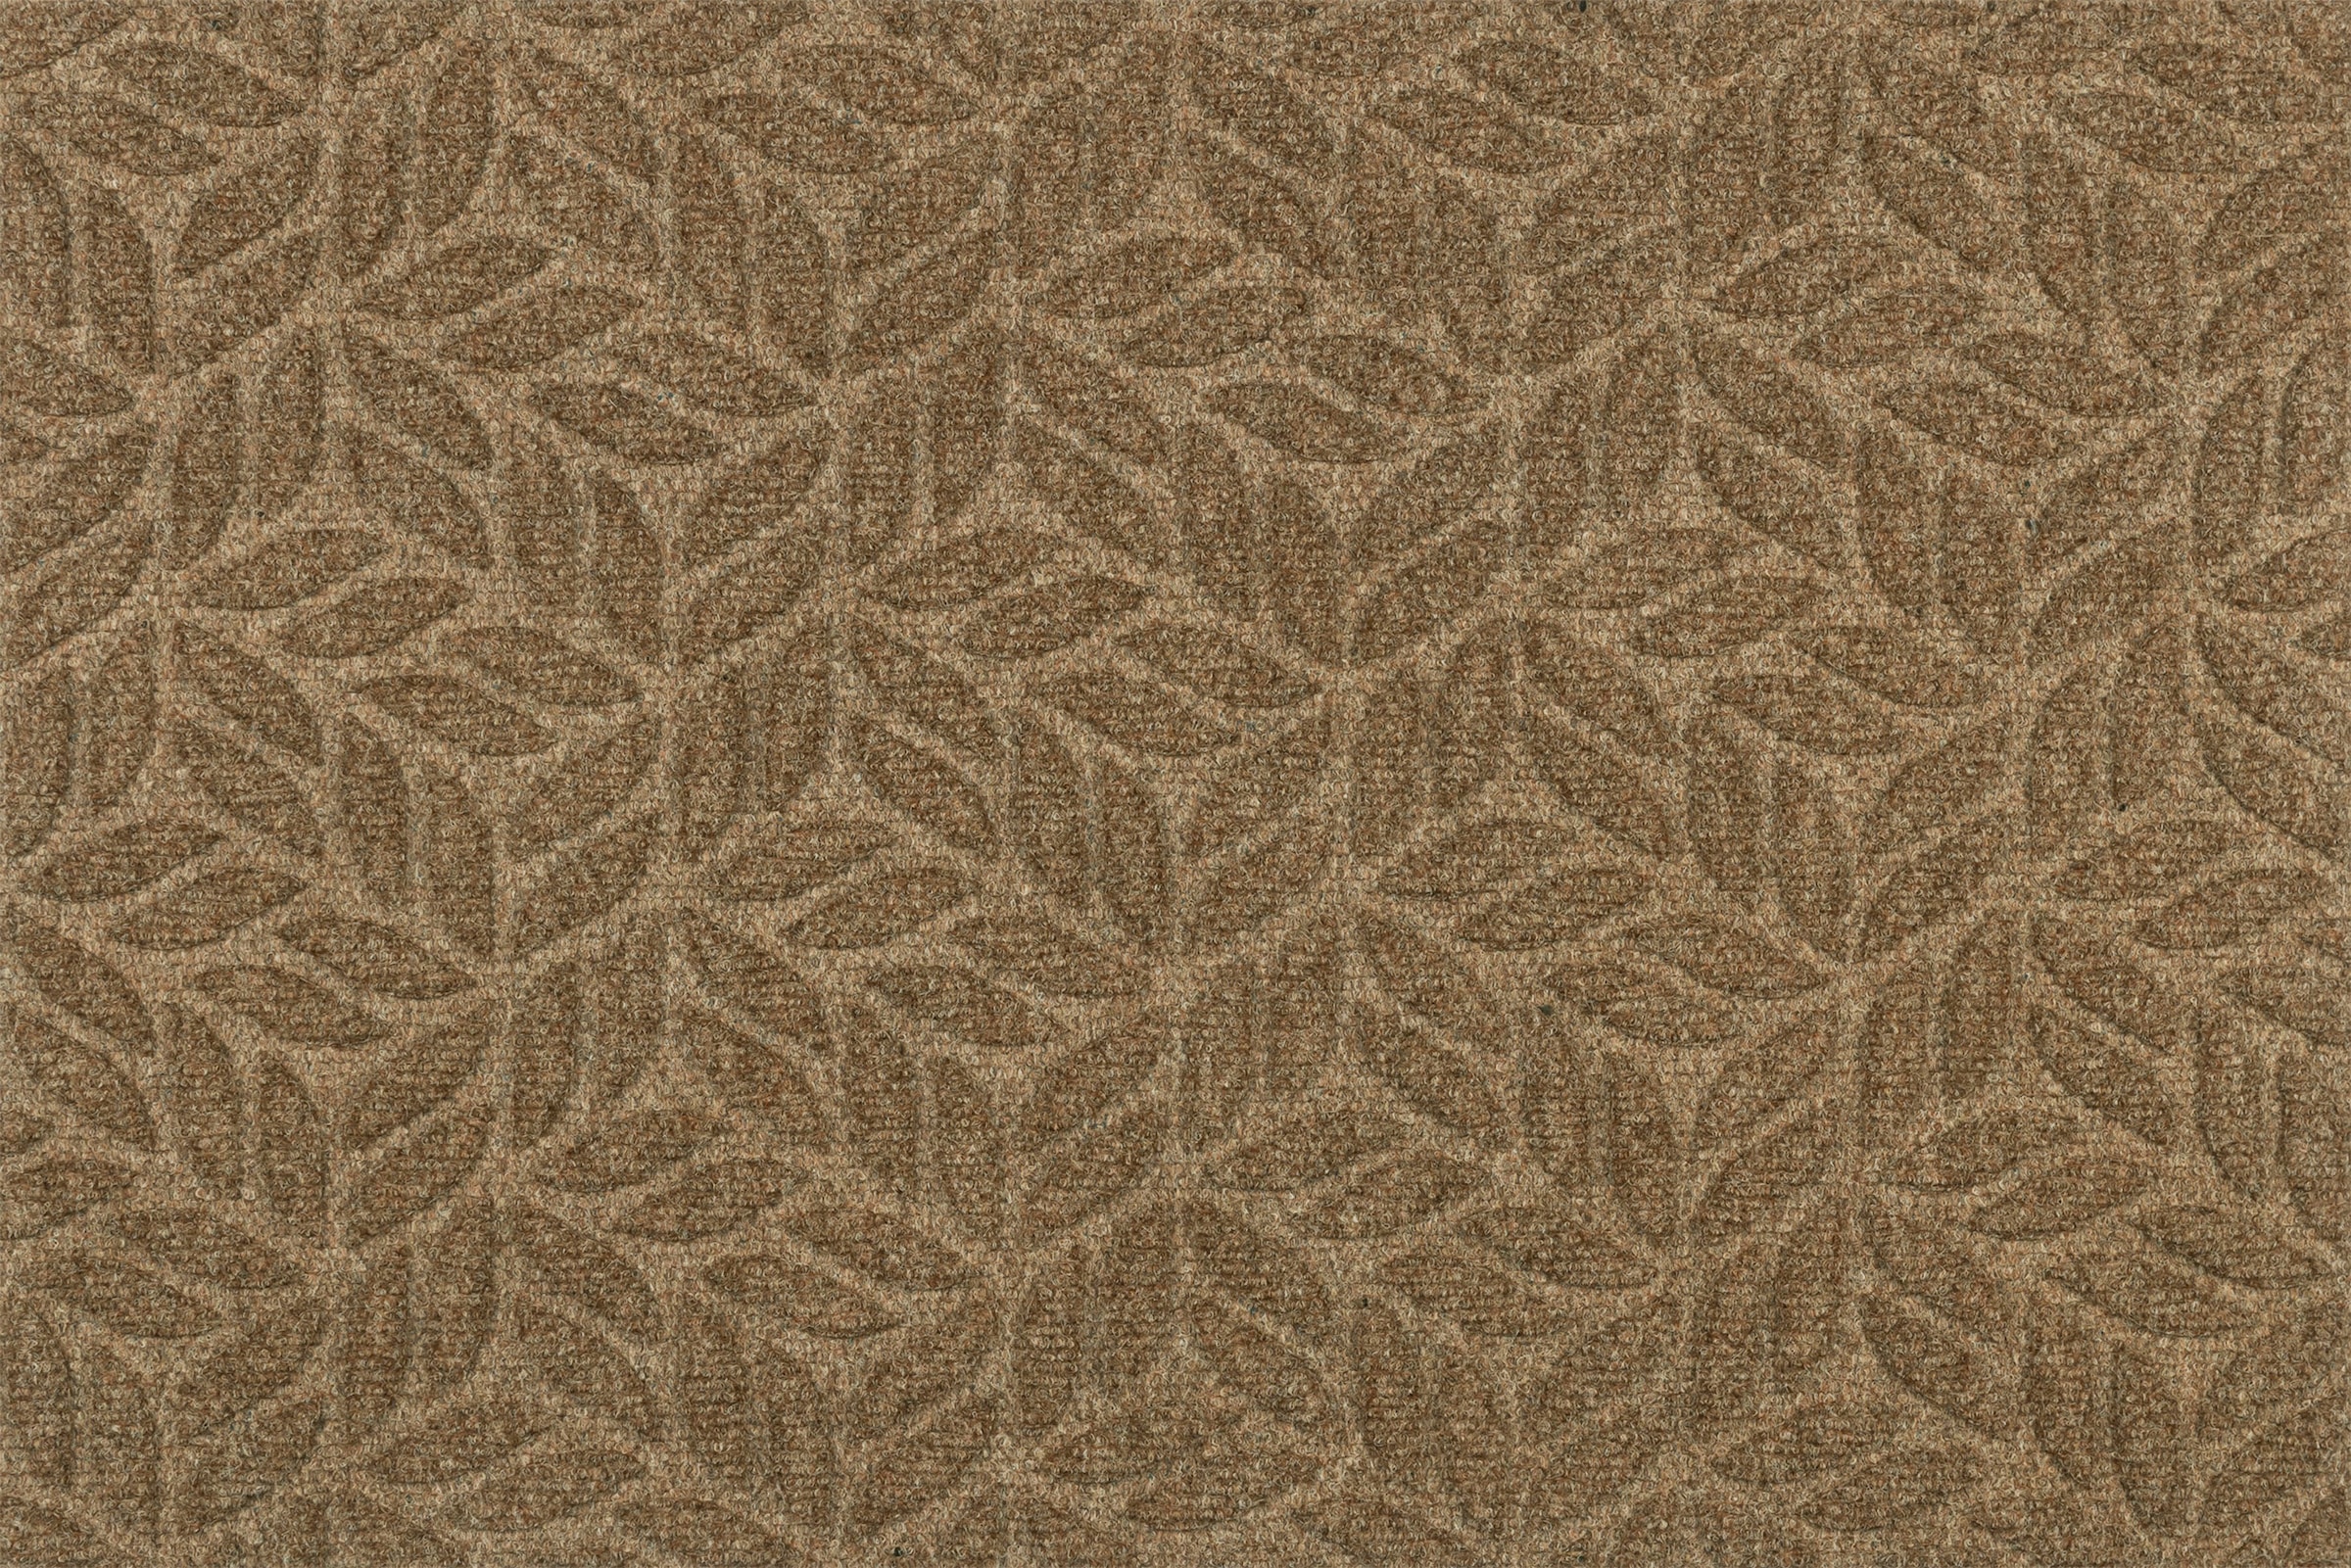 wash+dry by Kleen-Tex Teppich »DUNE Leaves Taupe«, rechteckig